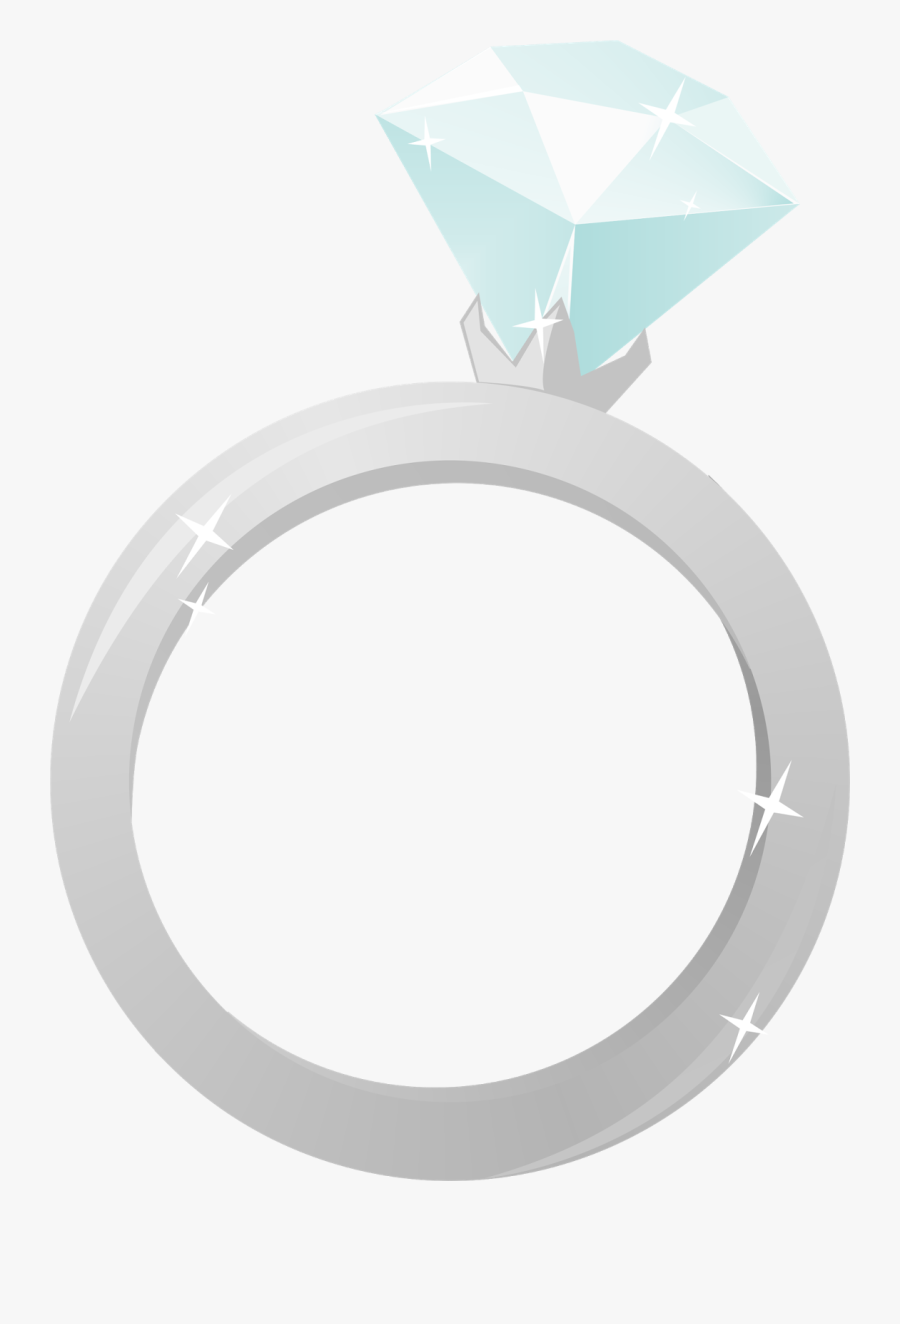 Wedding Rings And Engagement Rings Clipart - Anillo De Compromiso Caricatura Png, Transparent Clipart